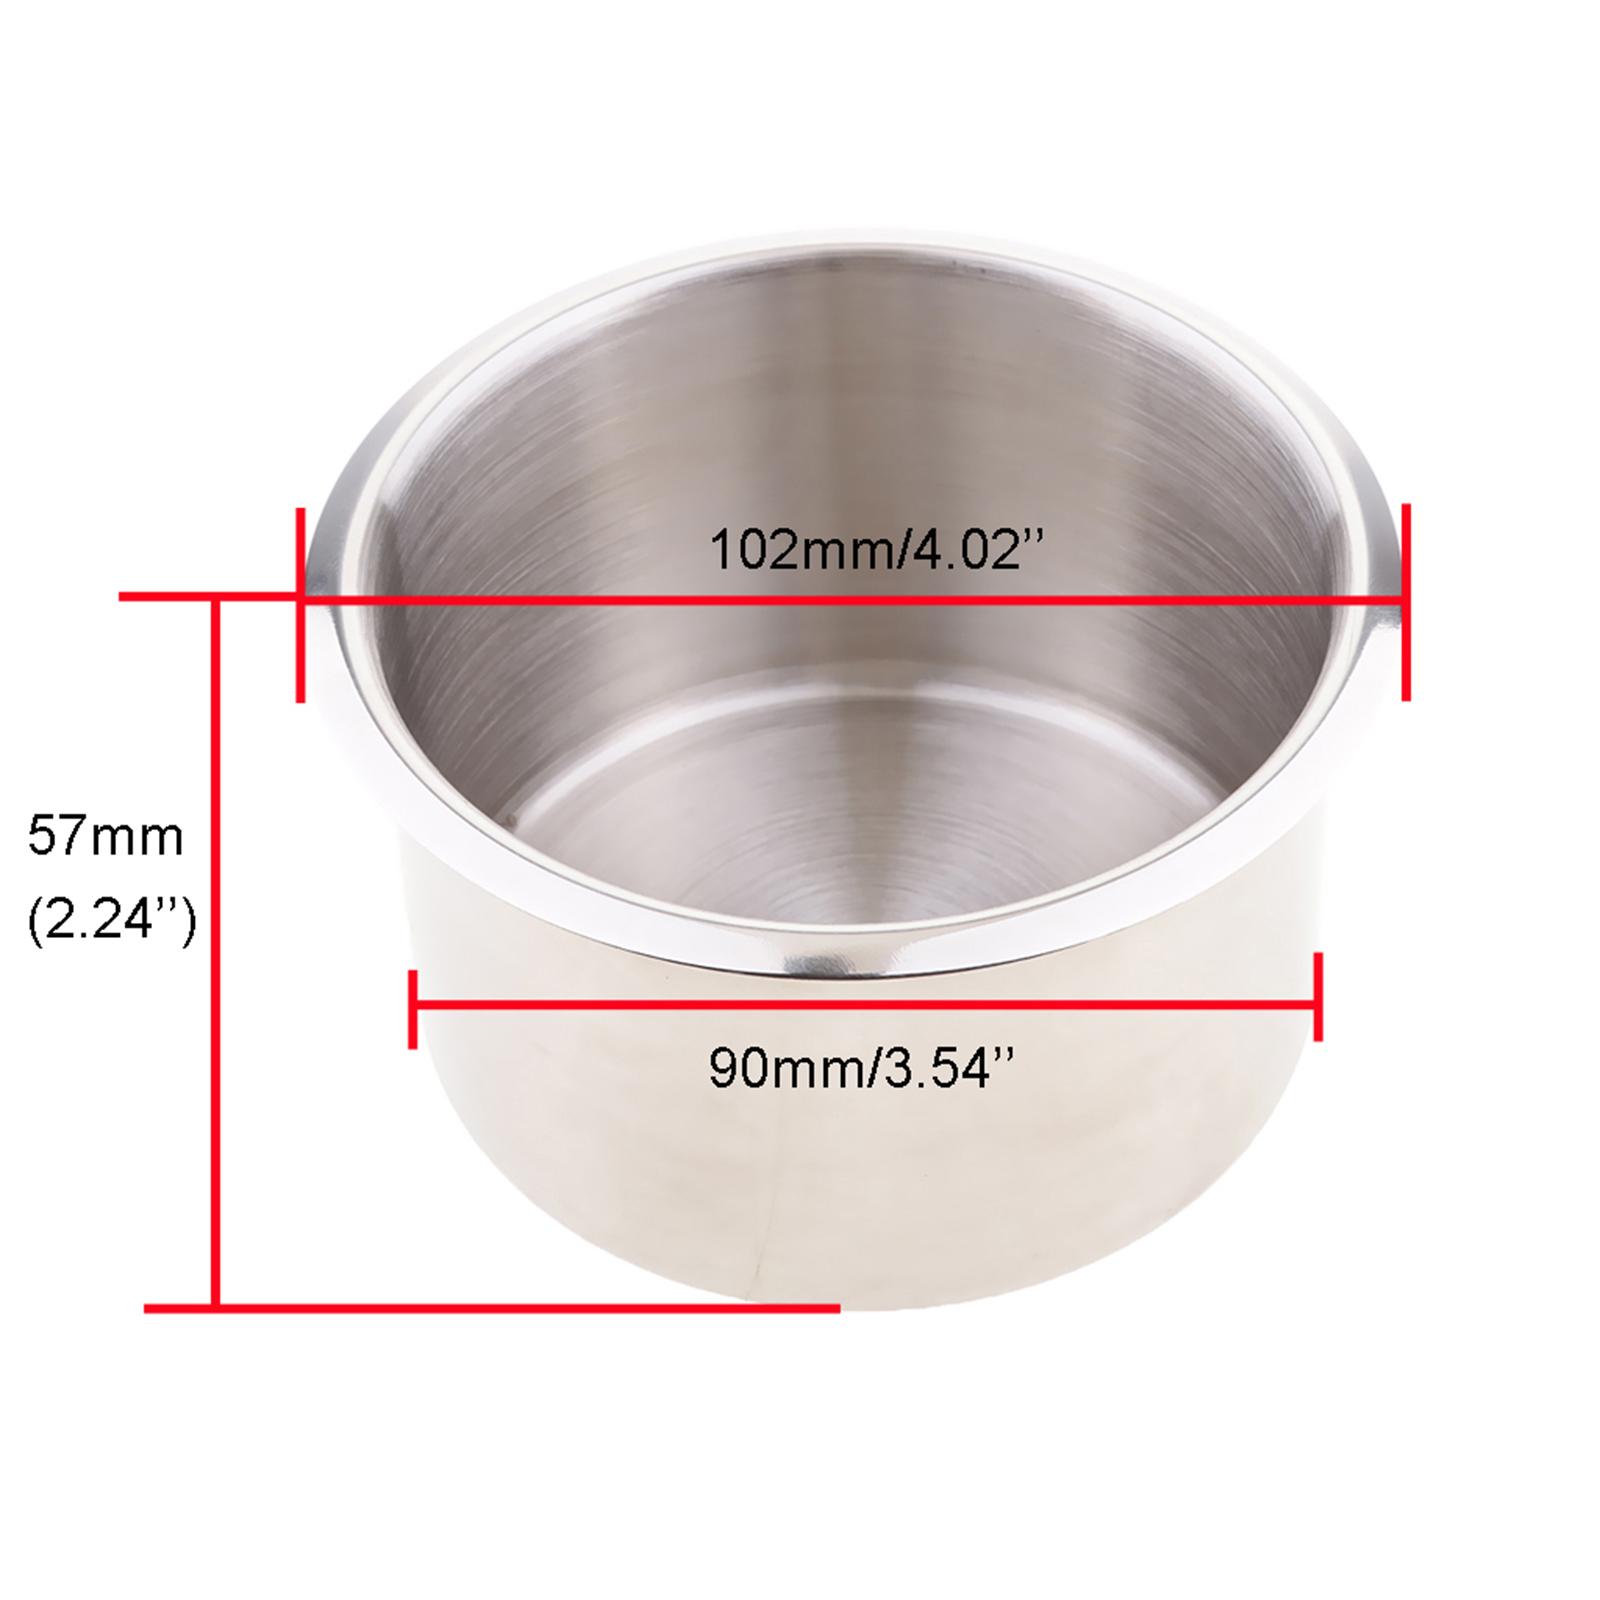 Stainless Steel Recessed Cup Drink Holder for Marine Boat RV Camper 90x55mm